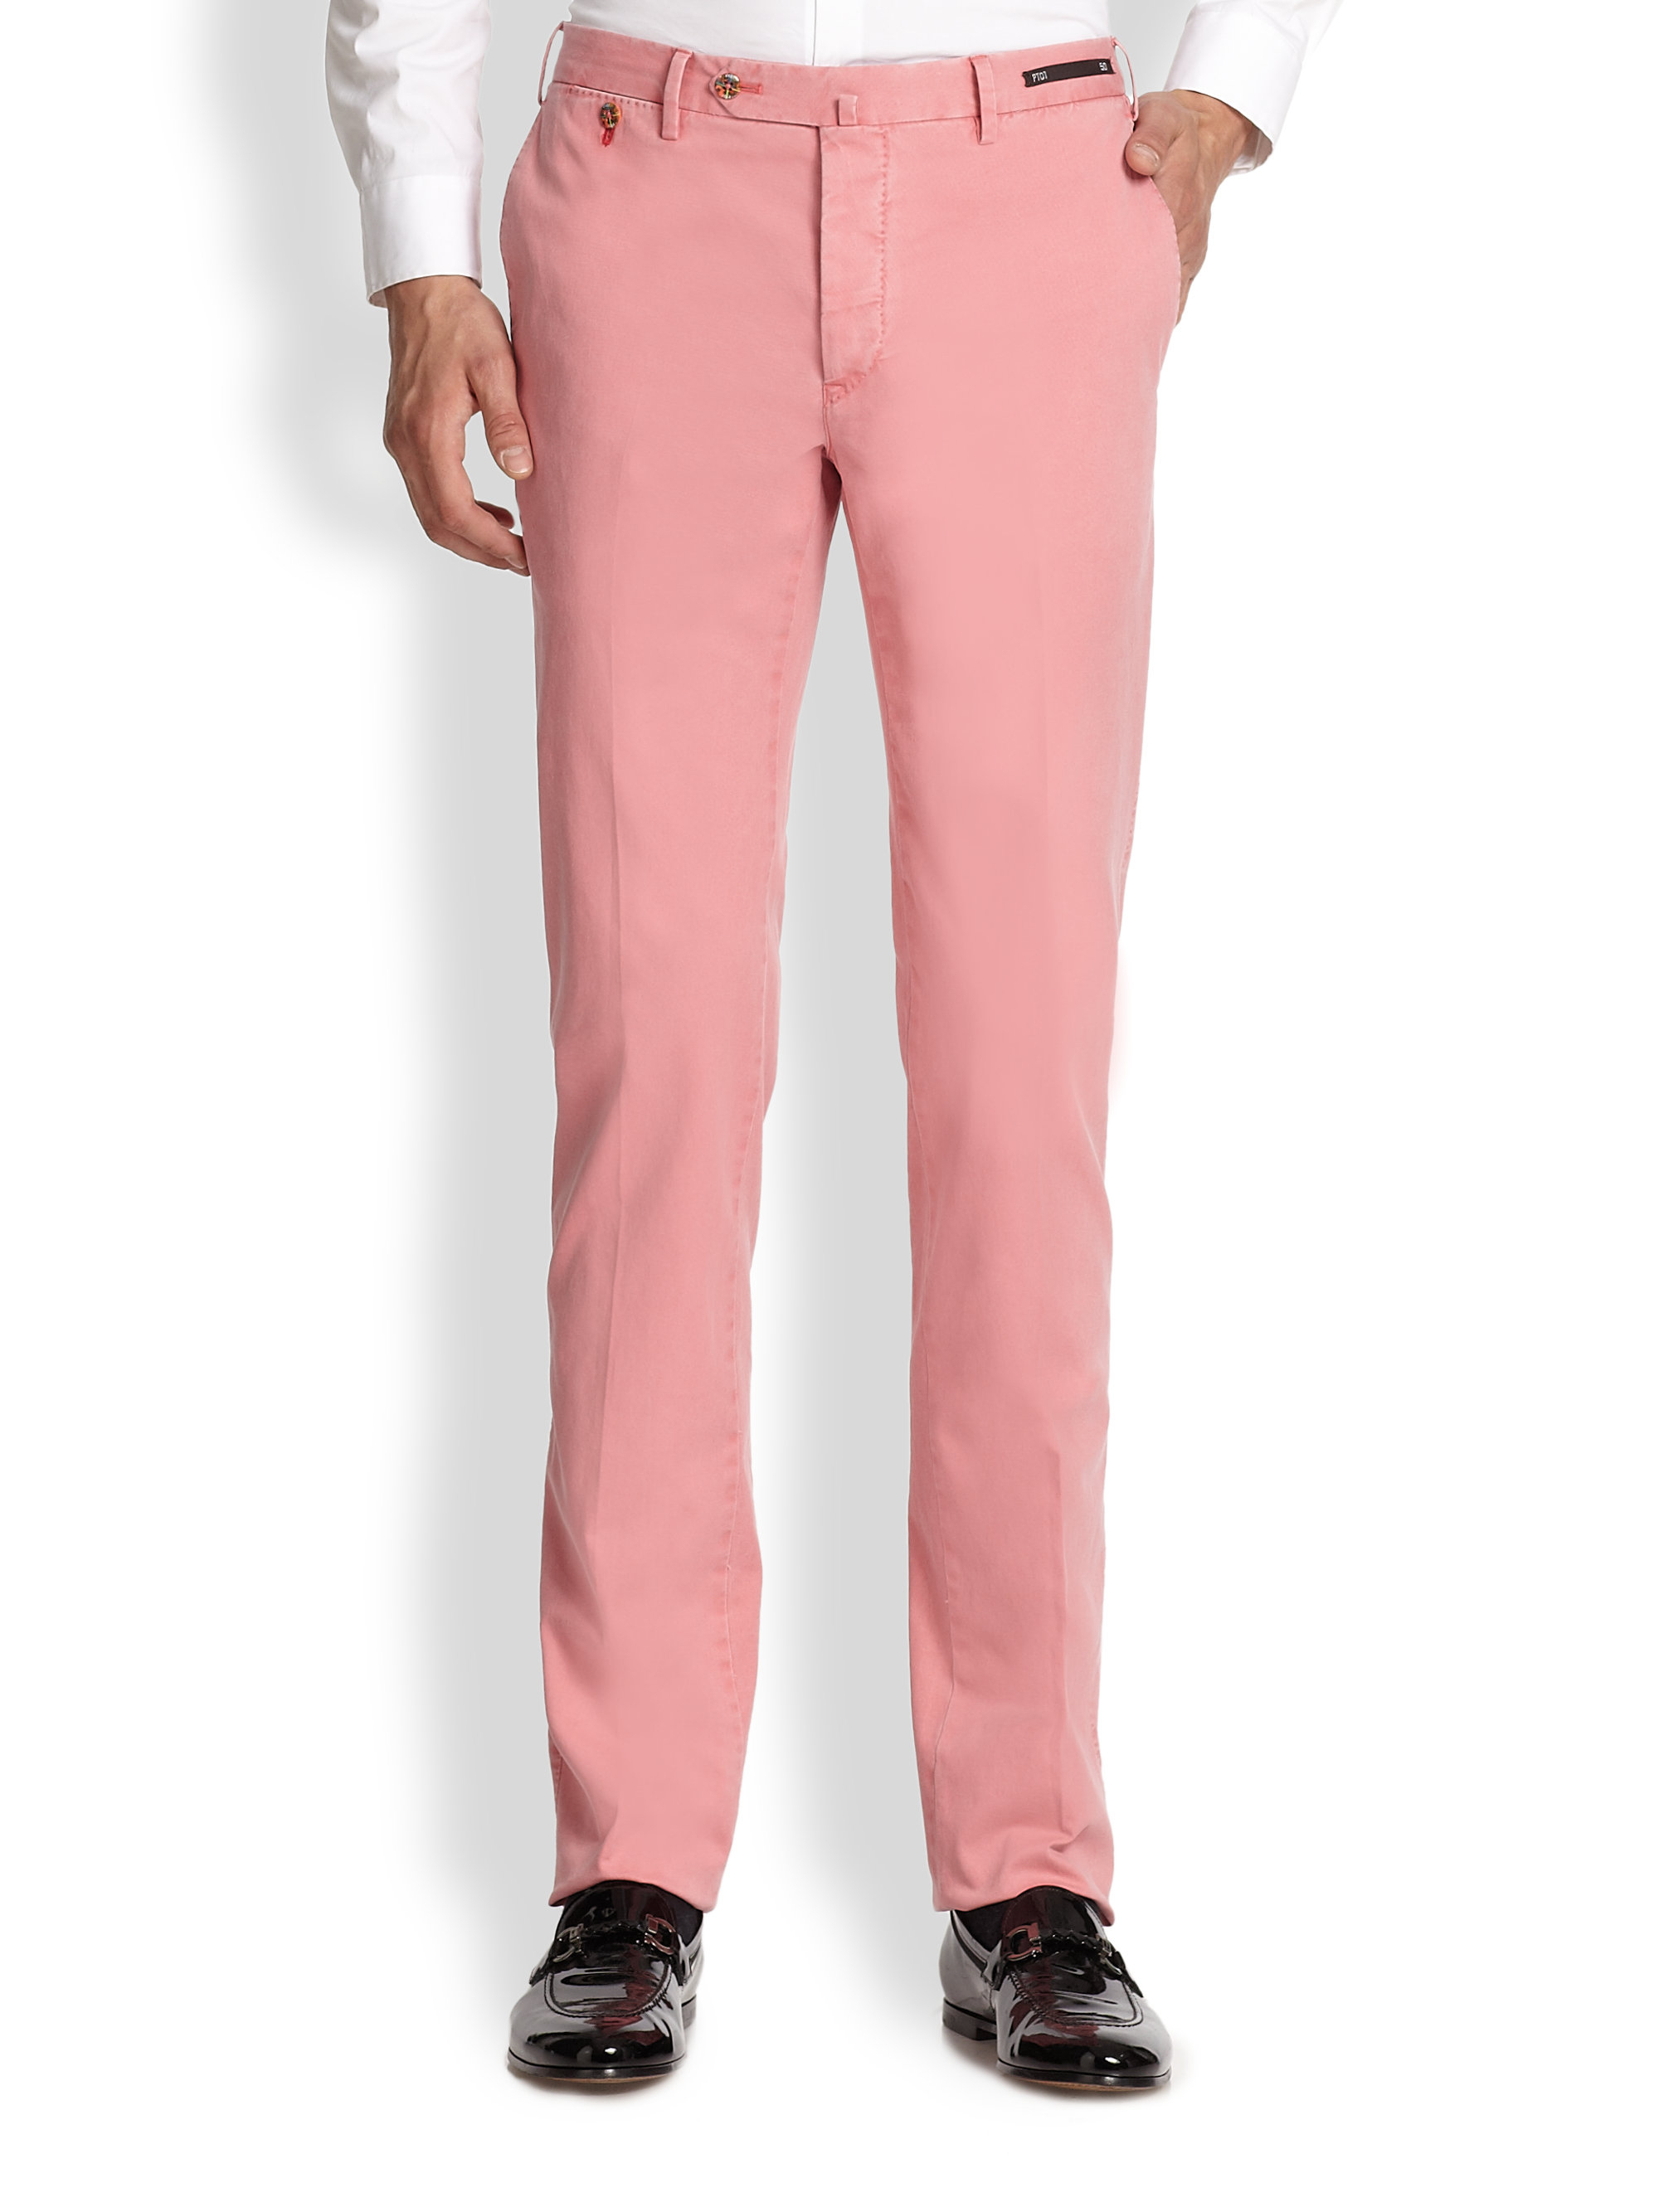 Lyst - Pt01 Pop Culture Printed-Button Pants in Pink for Men